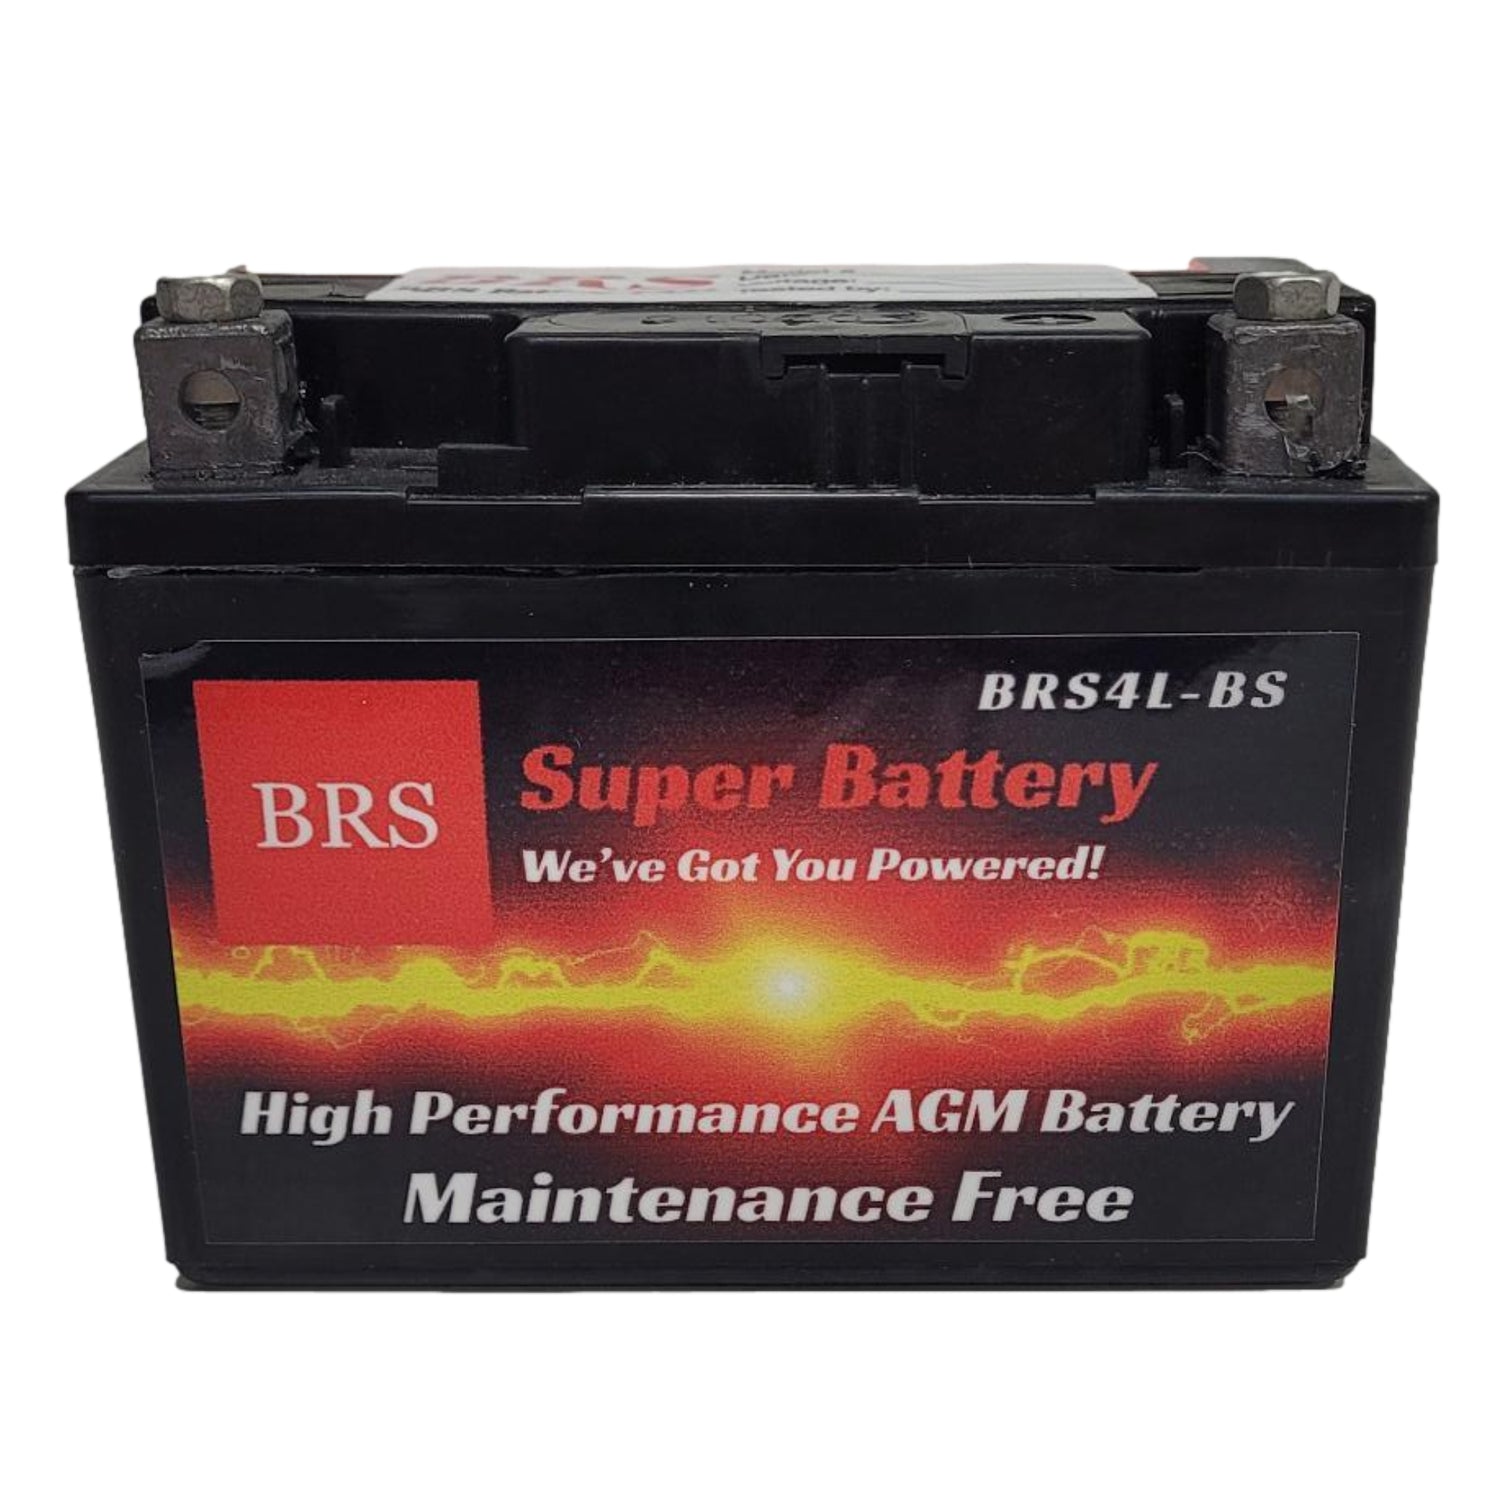 WPX4L-BS 12v High Performance Sealed AGM PowerSport 10 Year Battery - BRS Super Battery